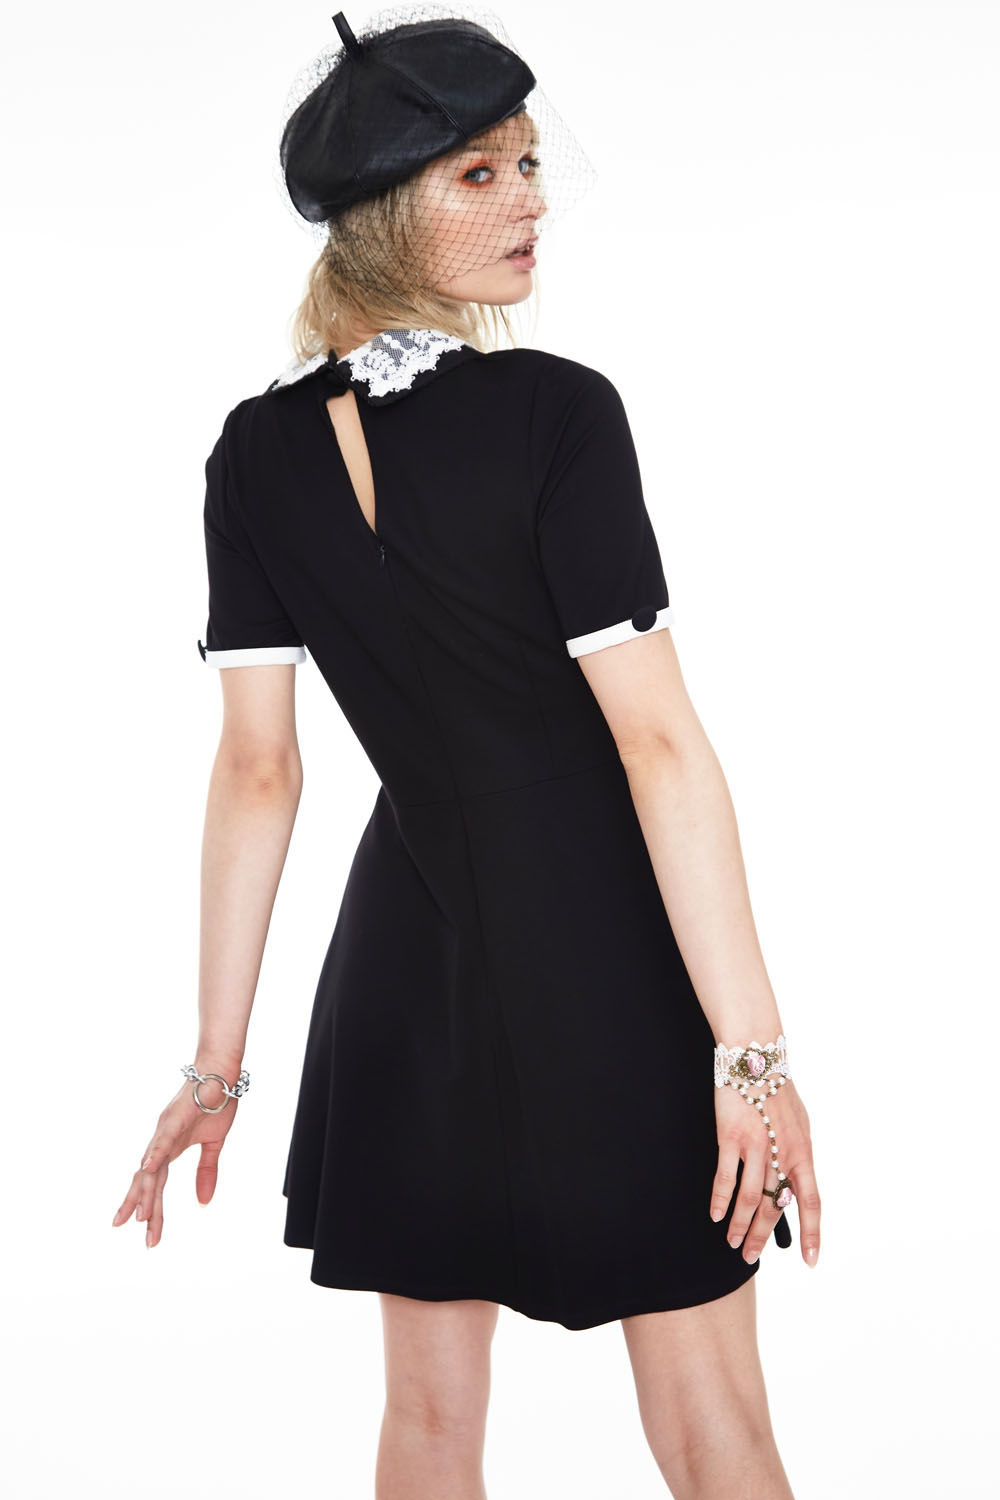 Black Knit Dress With White Lace Collar by Jawbreaker